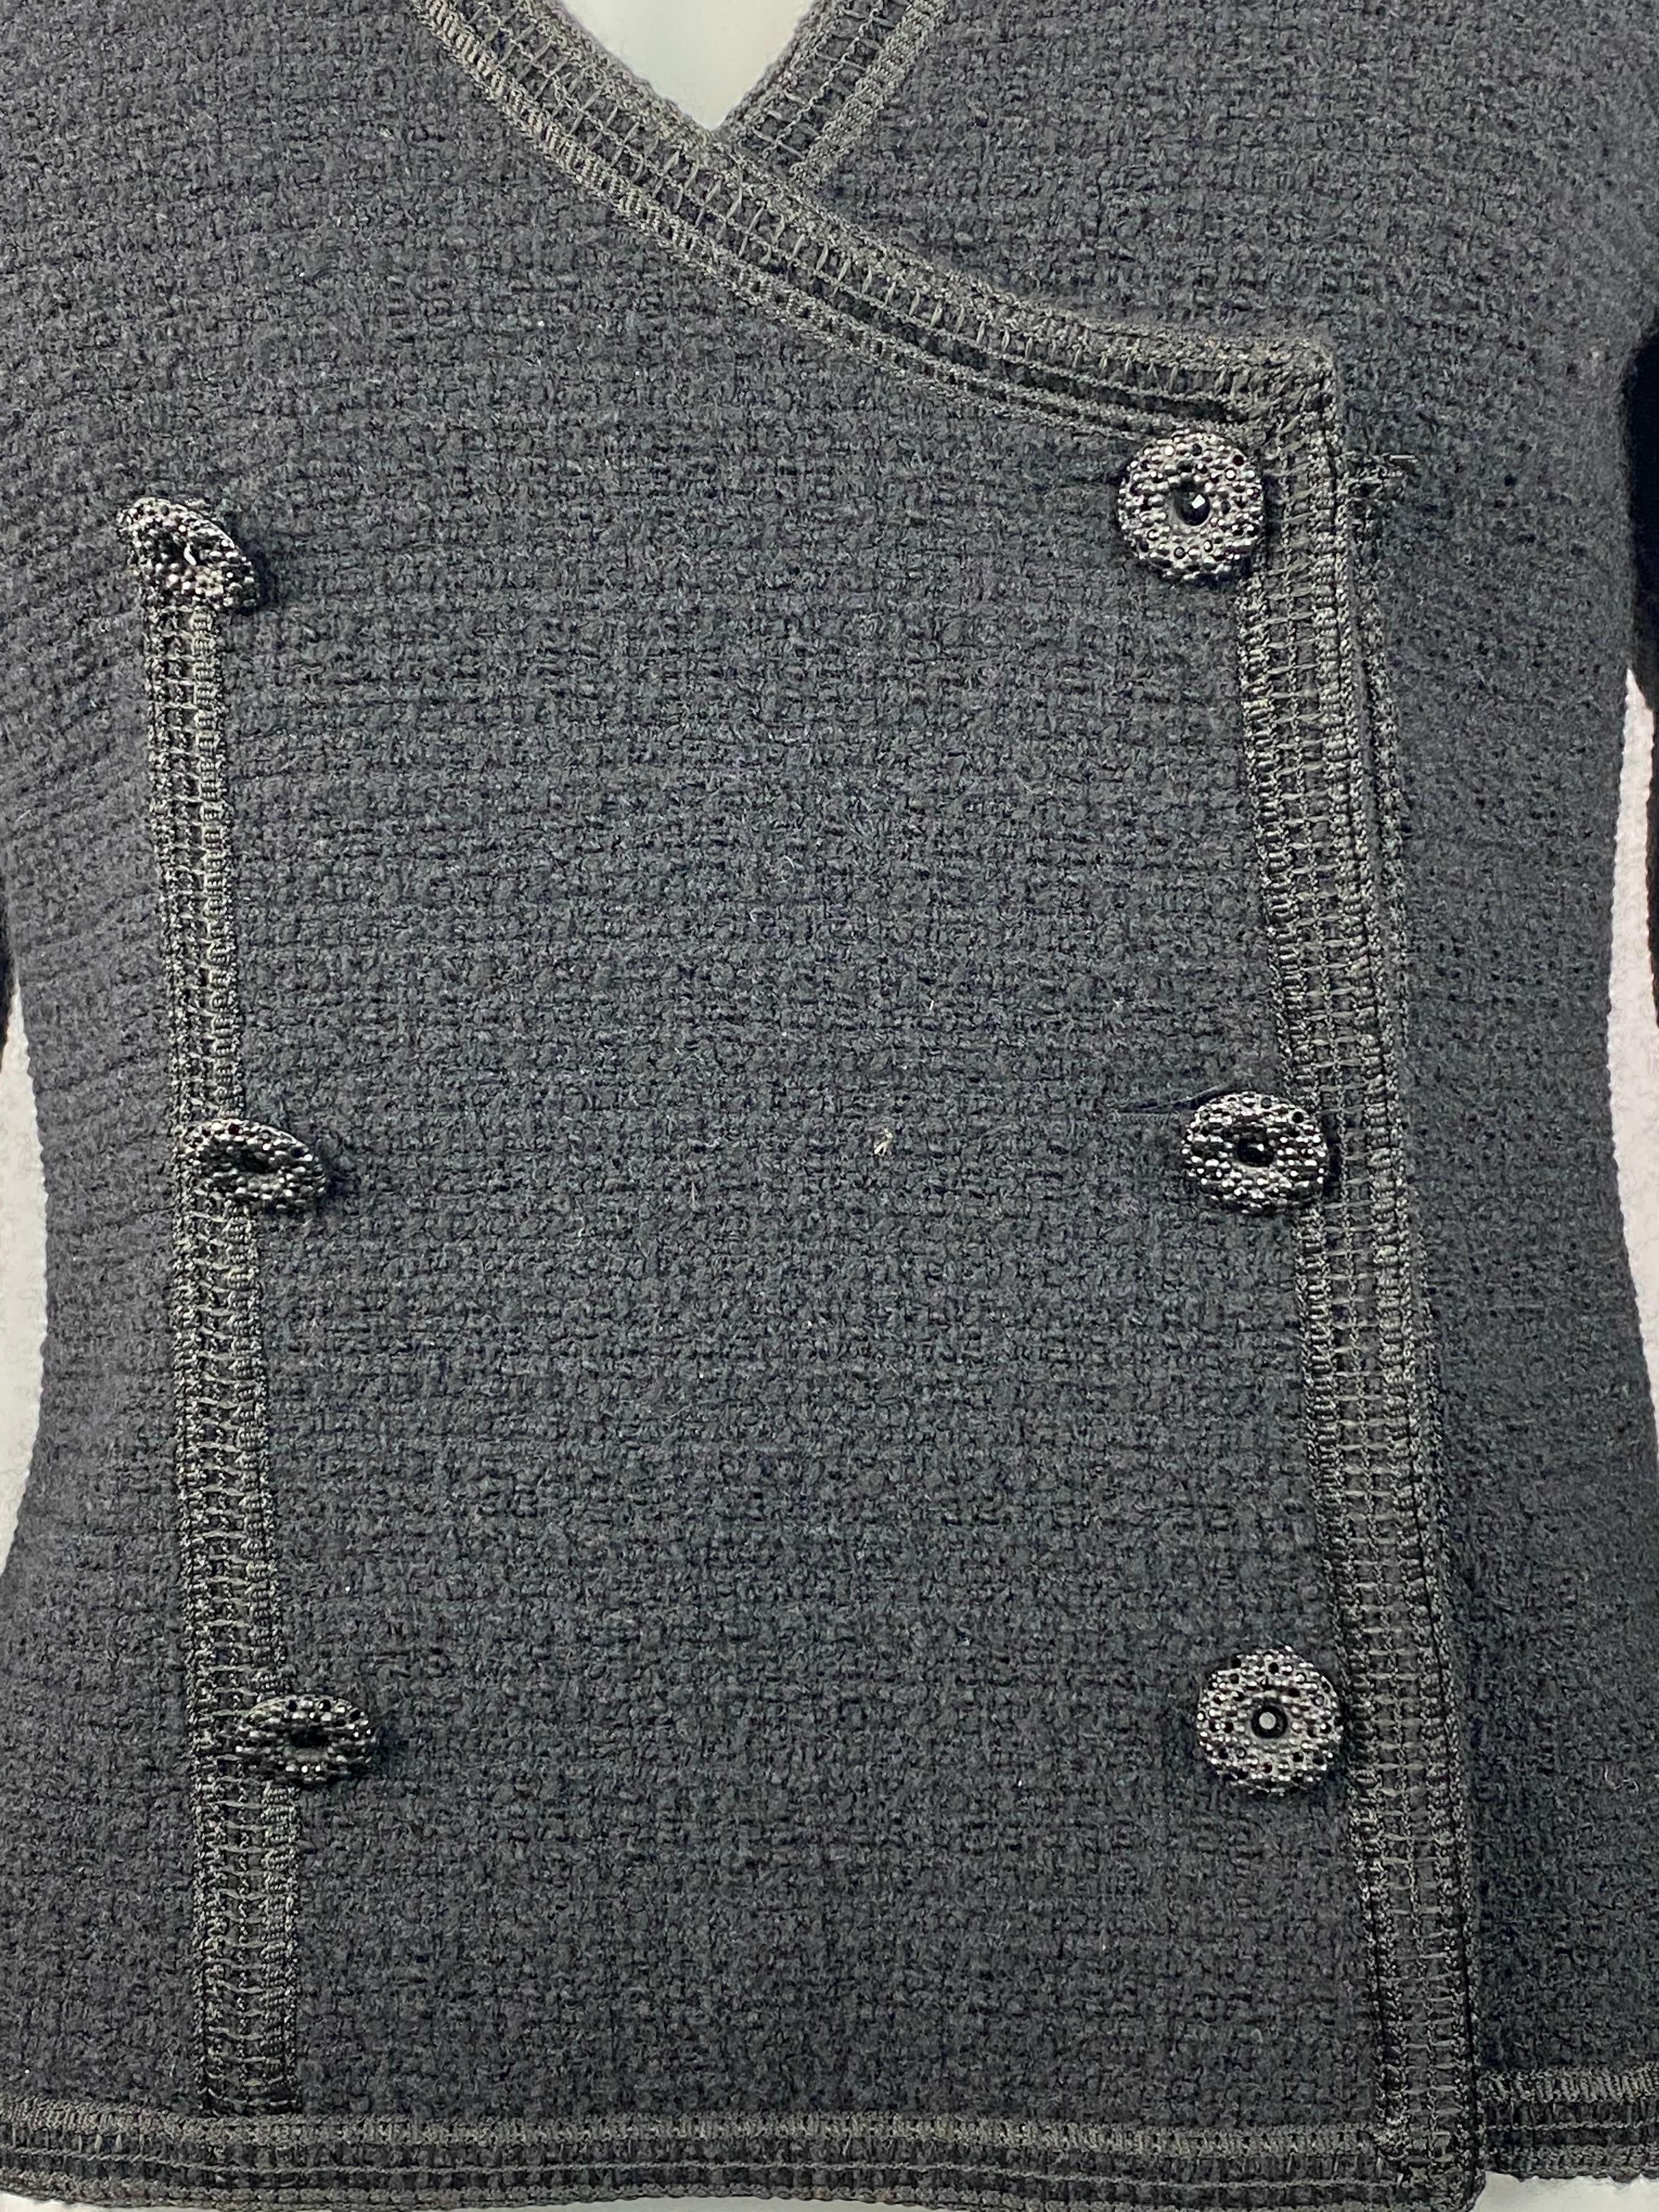 Vintage Chanel Black Tweed Blaze Jacket Size 38

Product details:
Size 38
Featuring half collar detail on the left side
V- neck
Front six buttons closure
Black Swarovski crystals on all the buttons and CC logo that is located on the left bottom